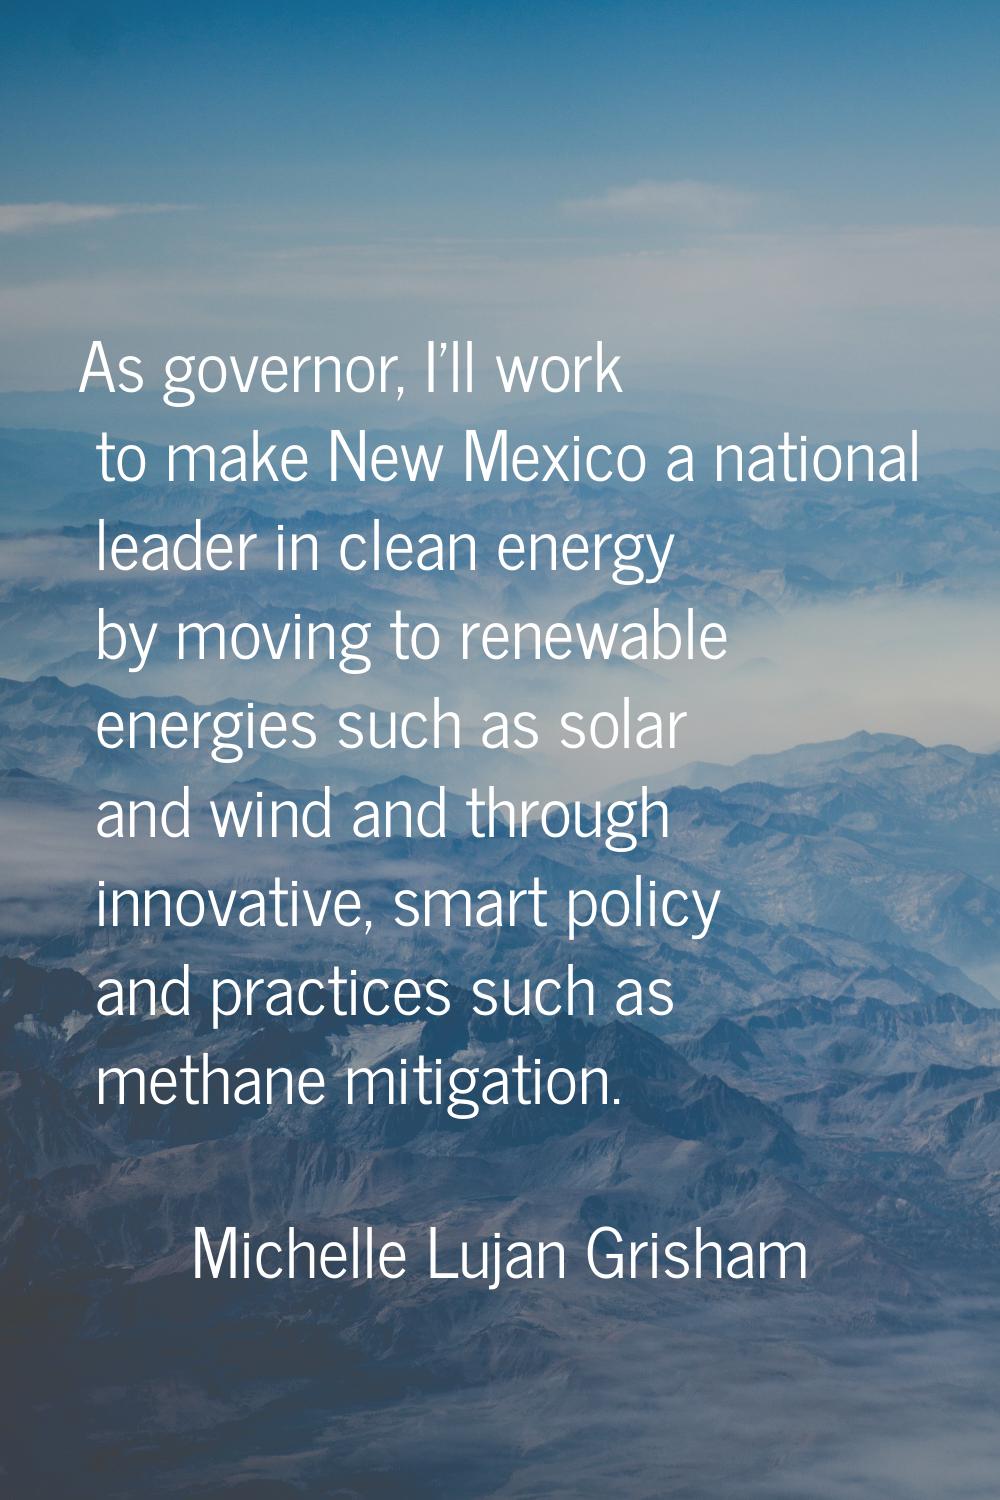 As governor, I'll work to make New Mexico a national leader in clean energy by moving to renewable 